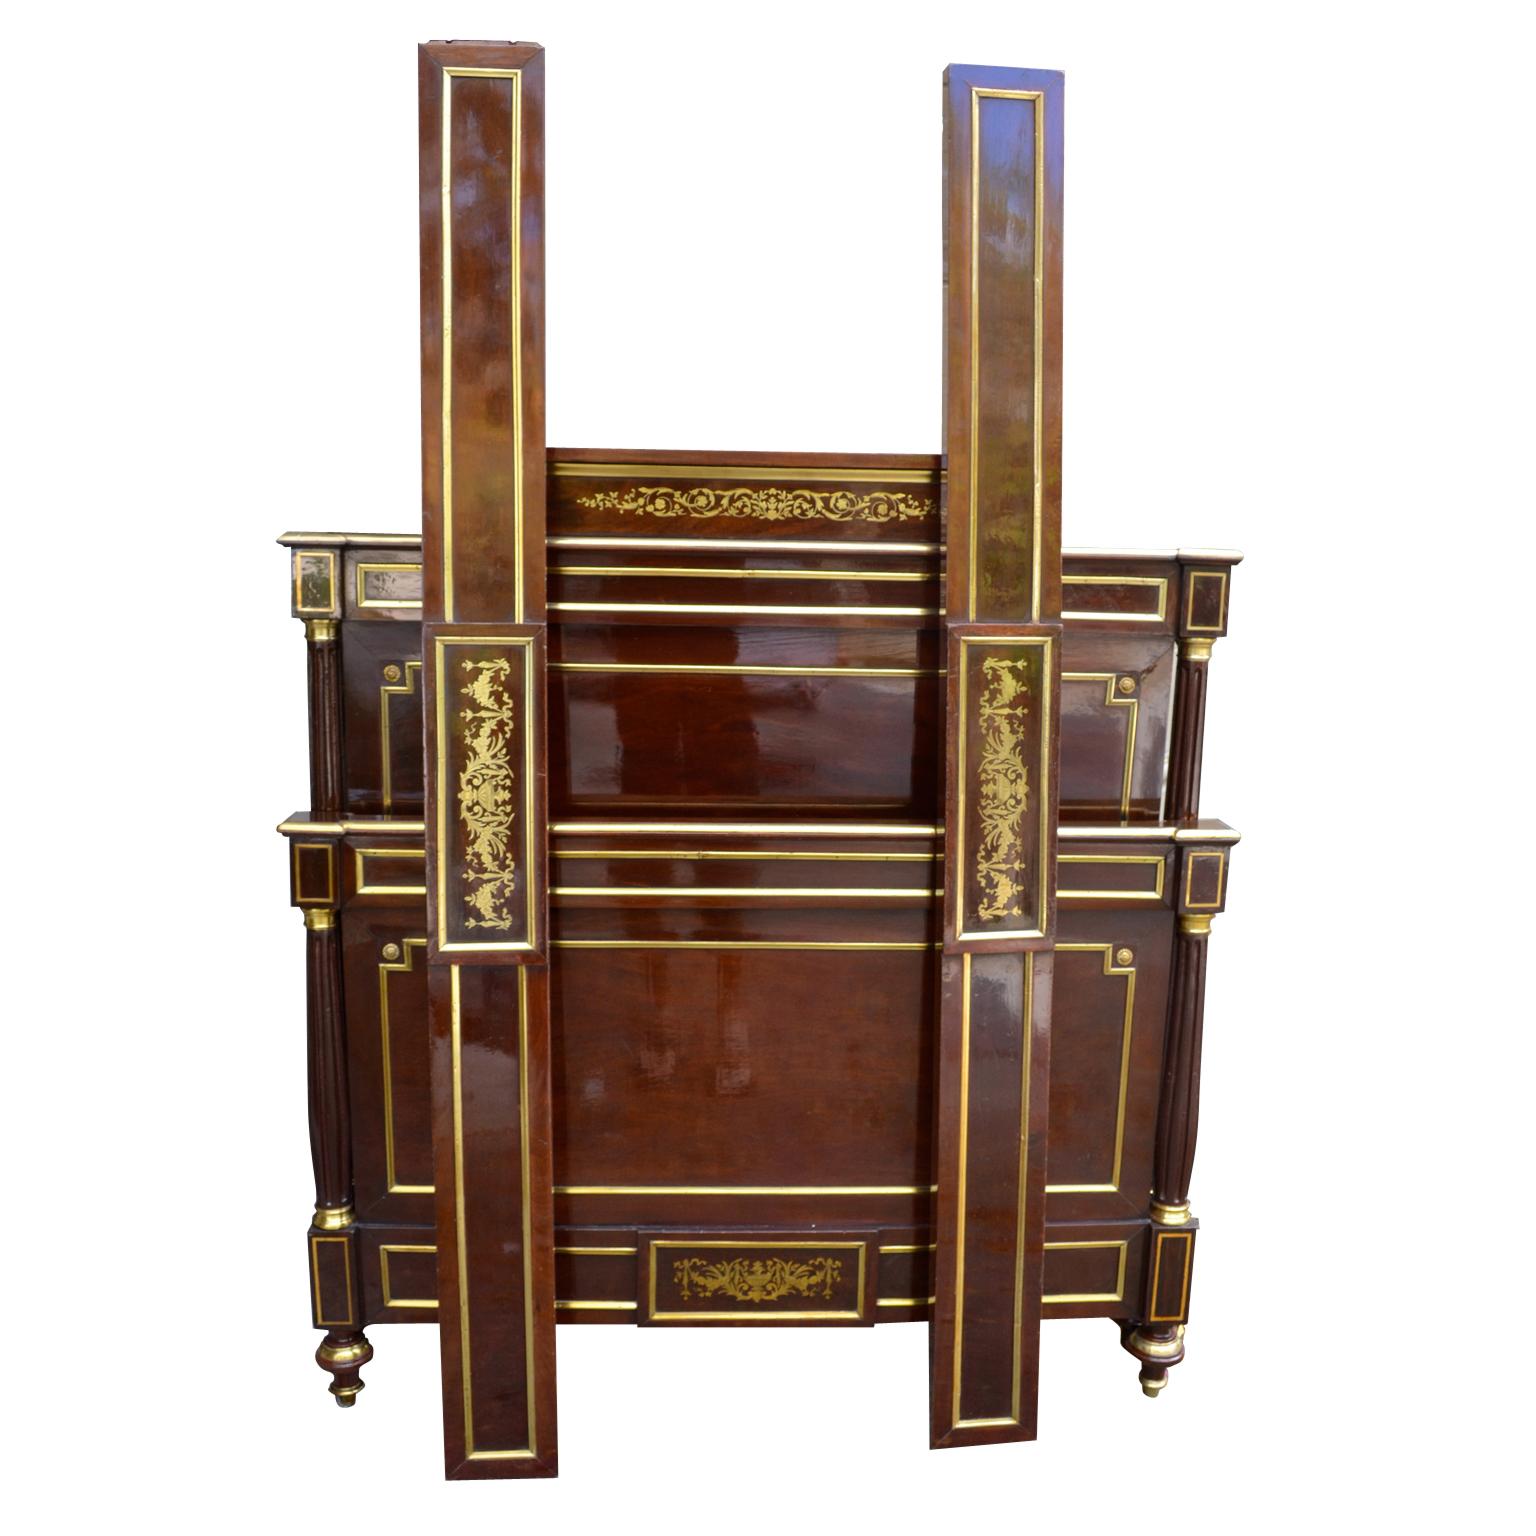 A fine Louis XVI style mahogany and brass inlaid three quarter size bed, French late 19th century, with rails, a raised flat crest and fluted side pillars with brass capitals and pediments. The head board, footboard and siderails have all been